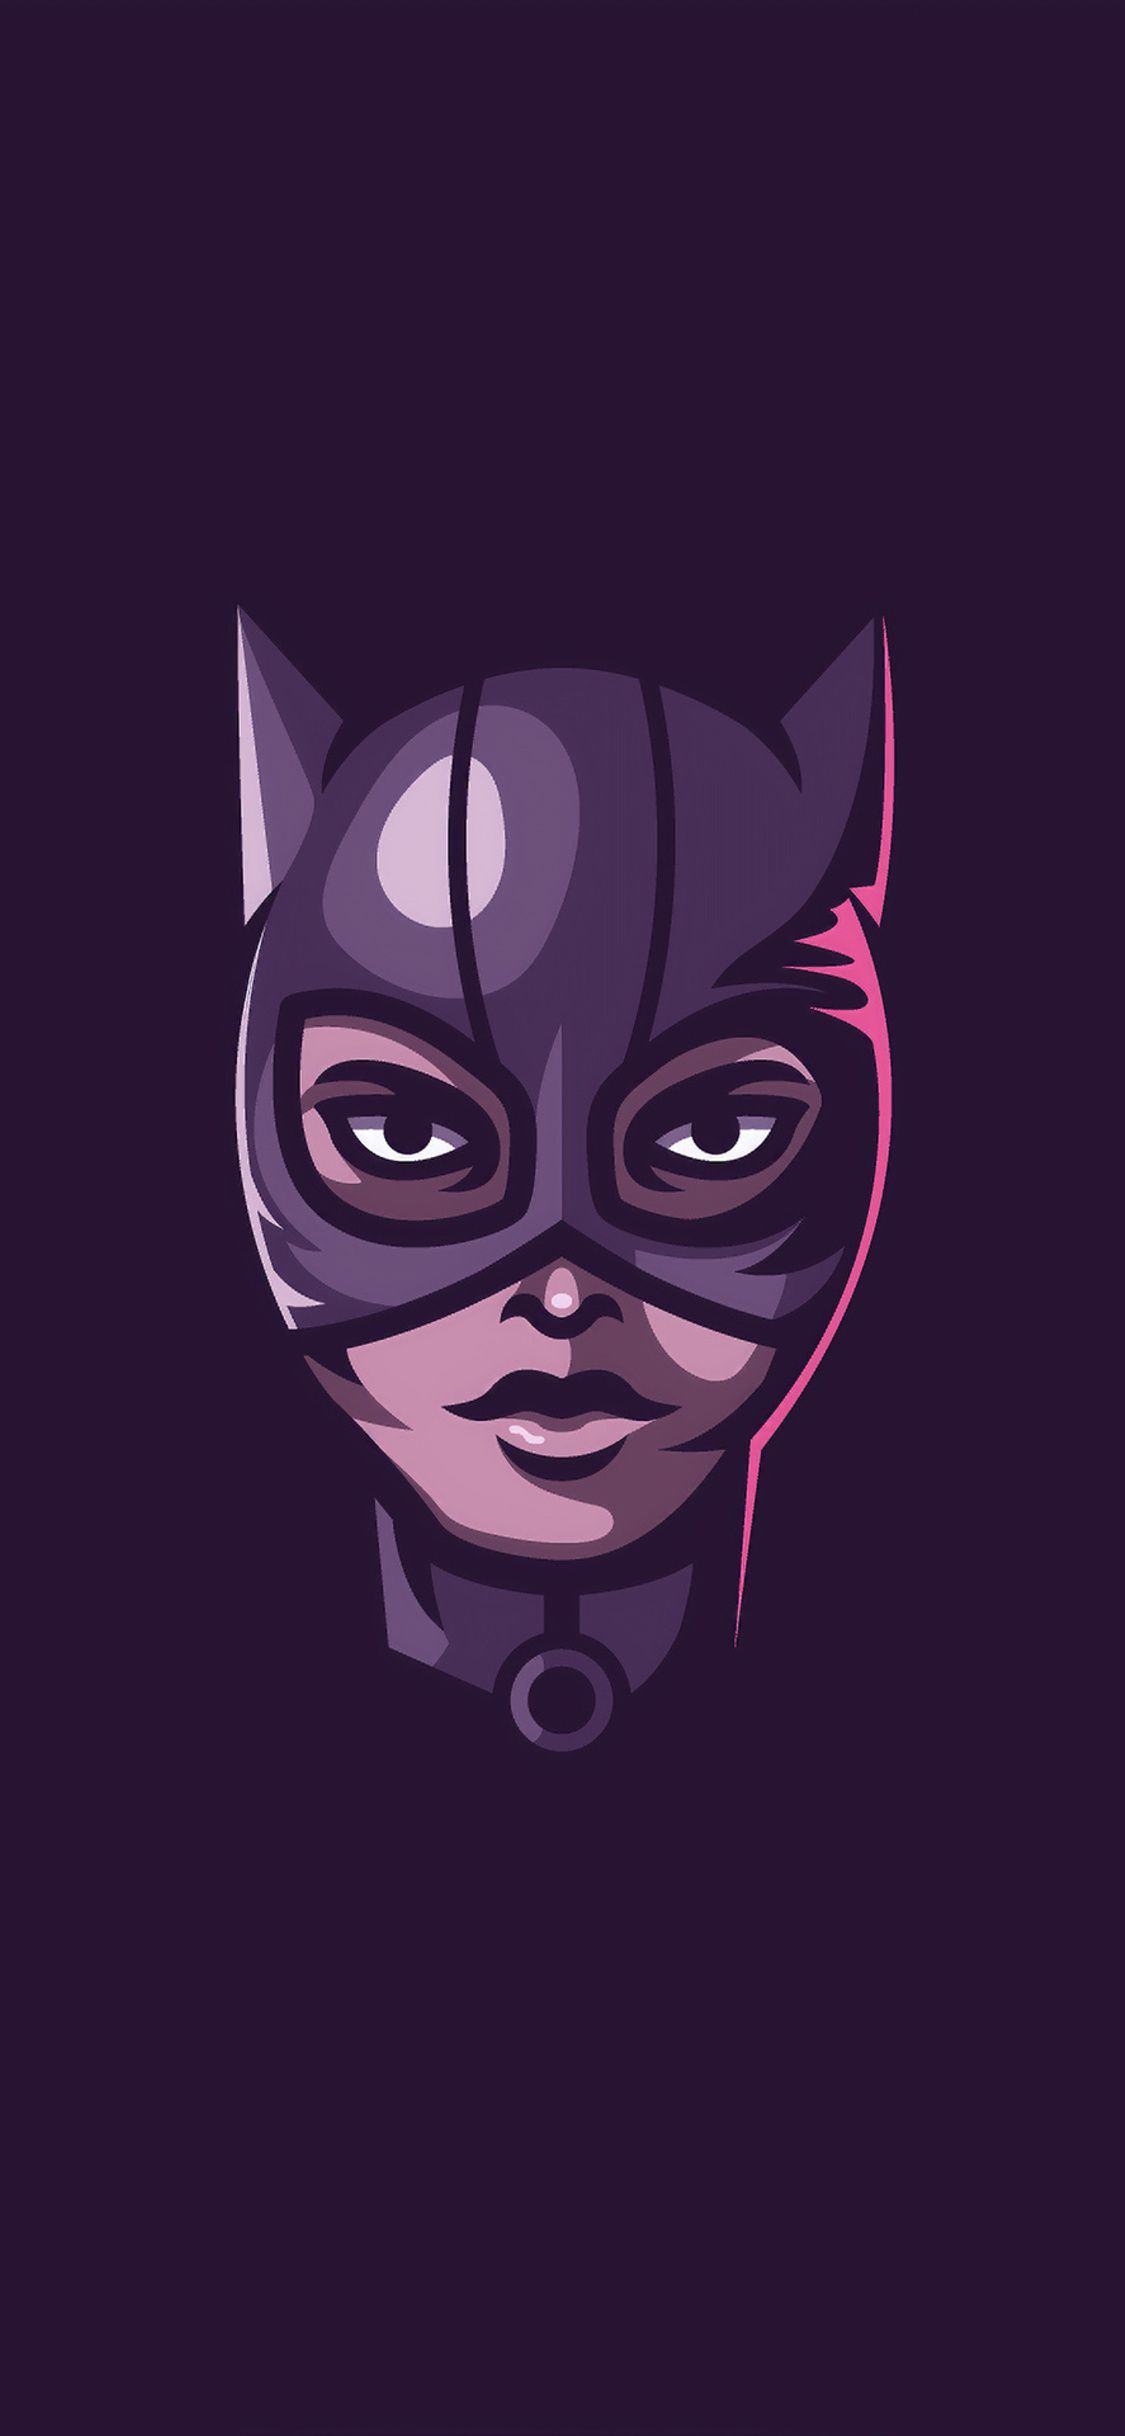 Catwoman Superhero Minimal Art iPhone XS, iPhone iPhone X HD 4k Wallpaper, Image, Background, Photo and Picture